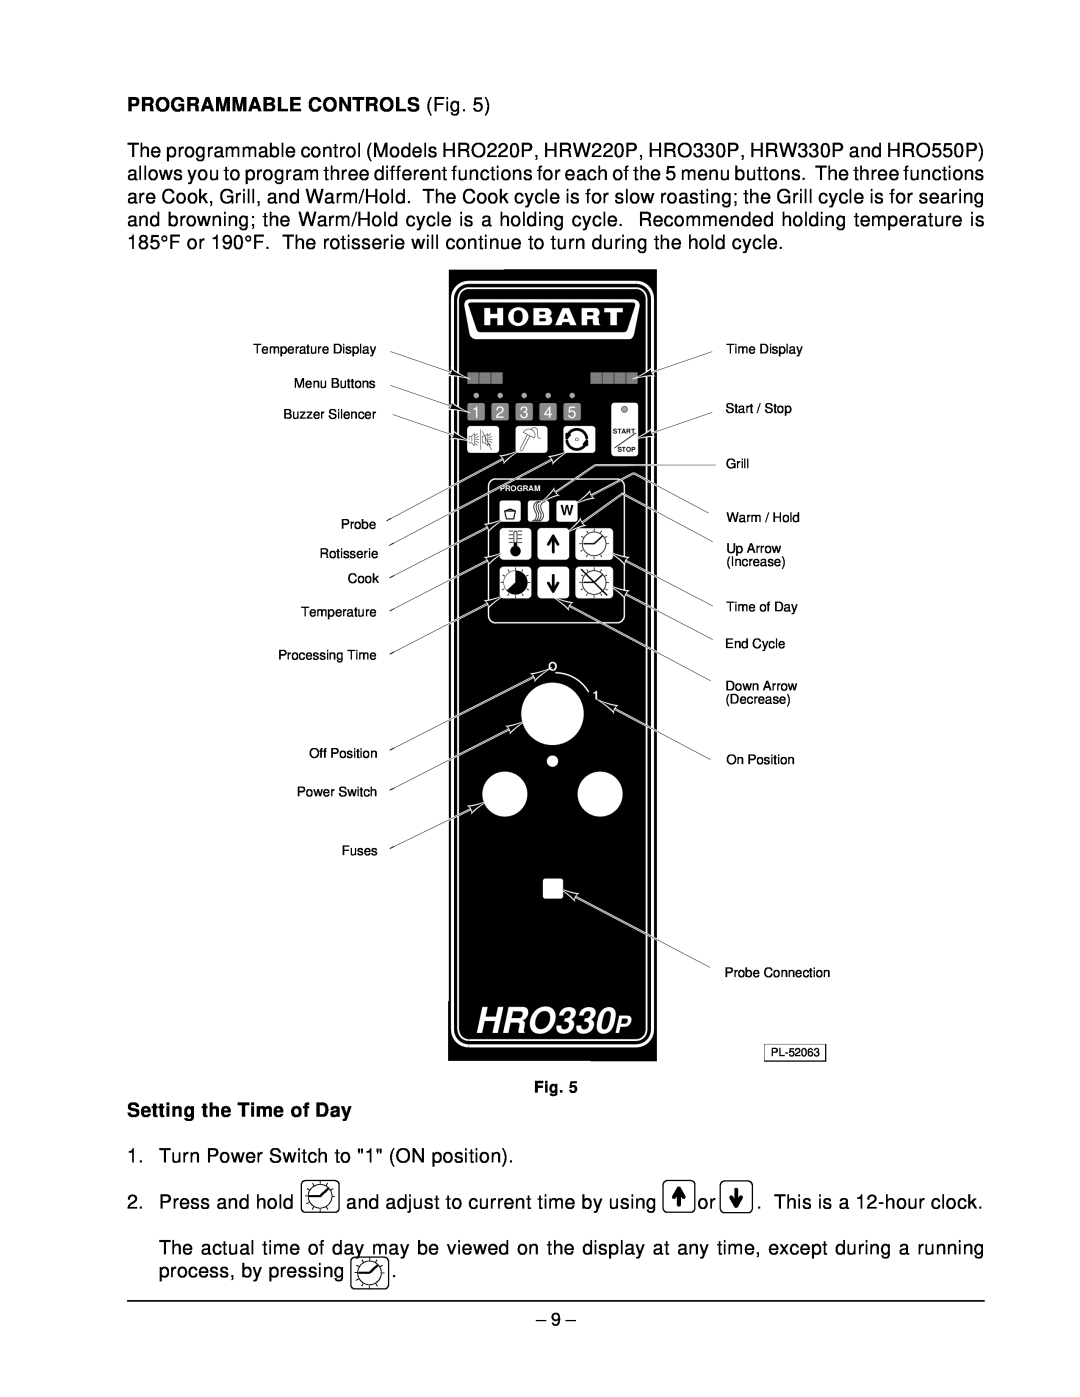 Hobart HRO550P, ML-43889 manual PROGRAMMABLE CONTROLS Fig, HRO330P, Setting the Time of Day 